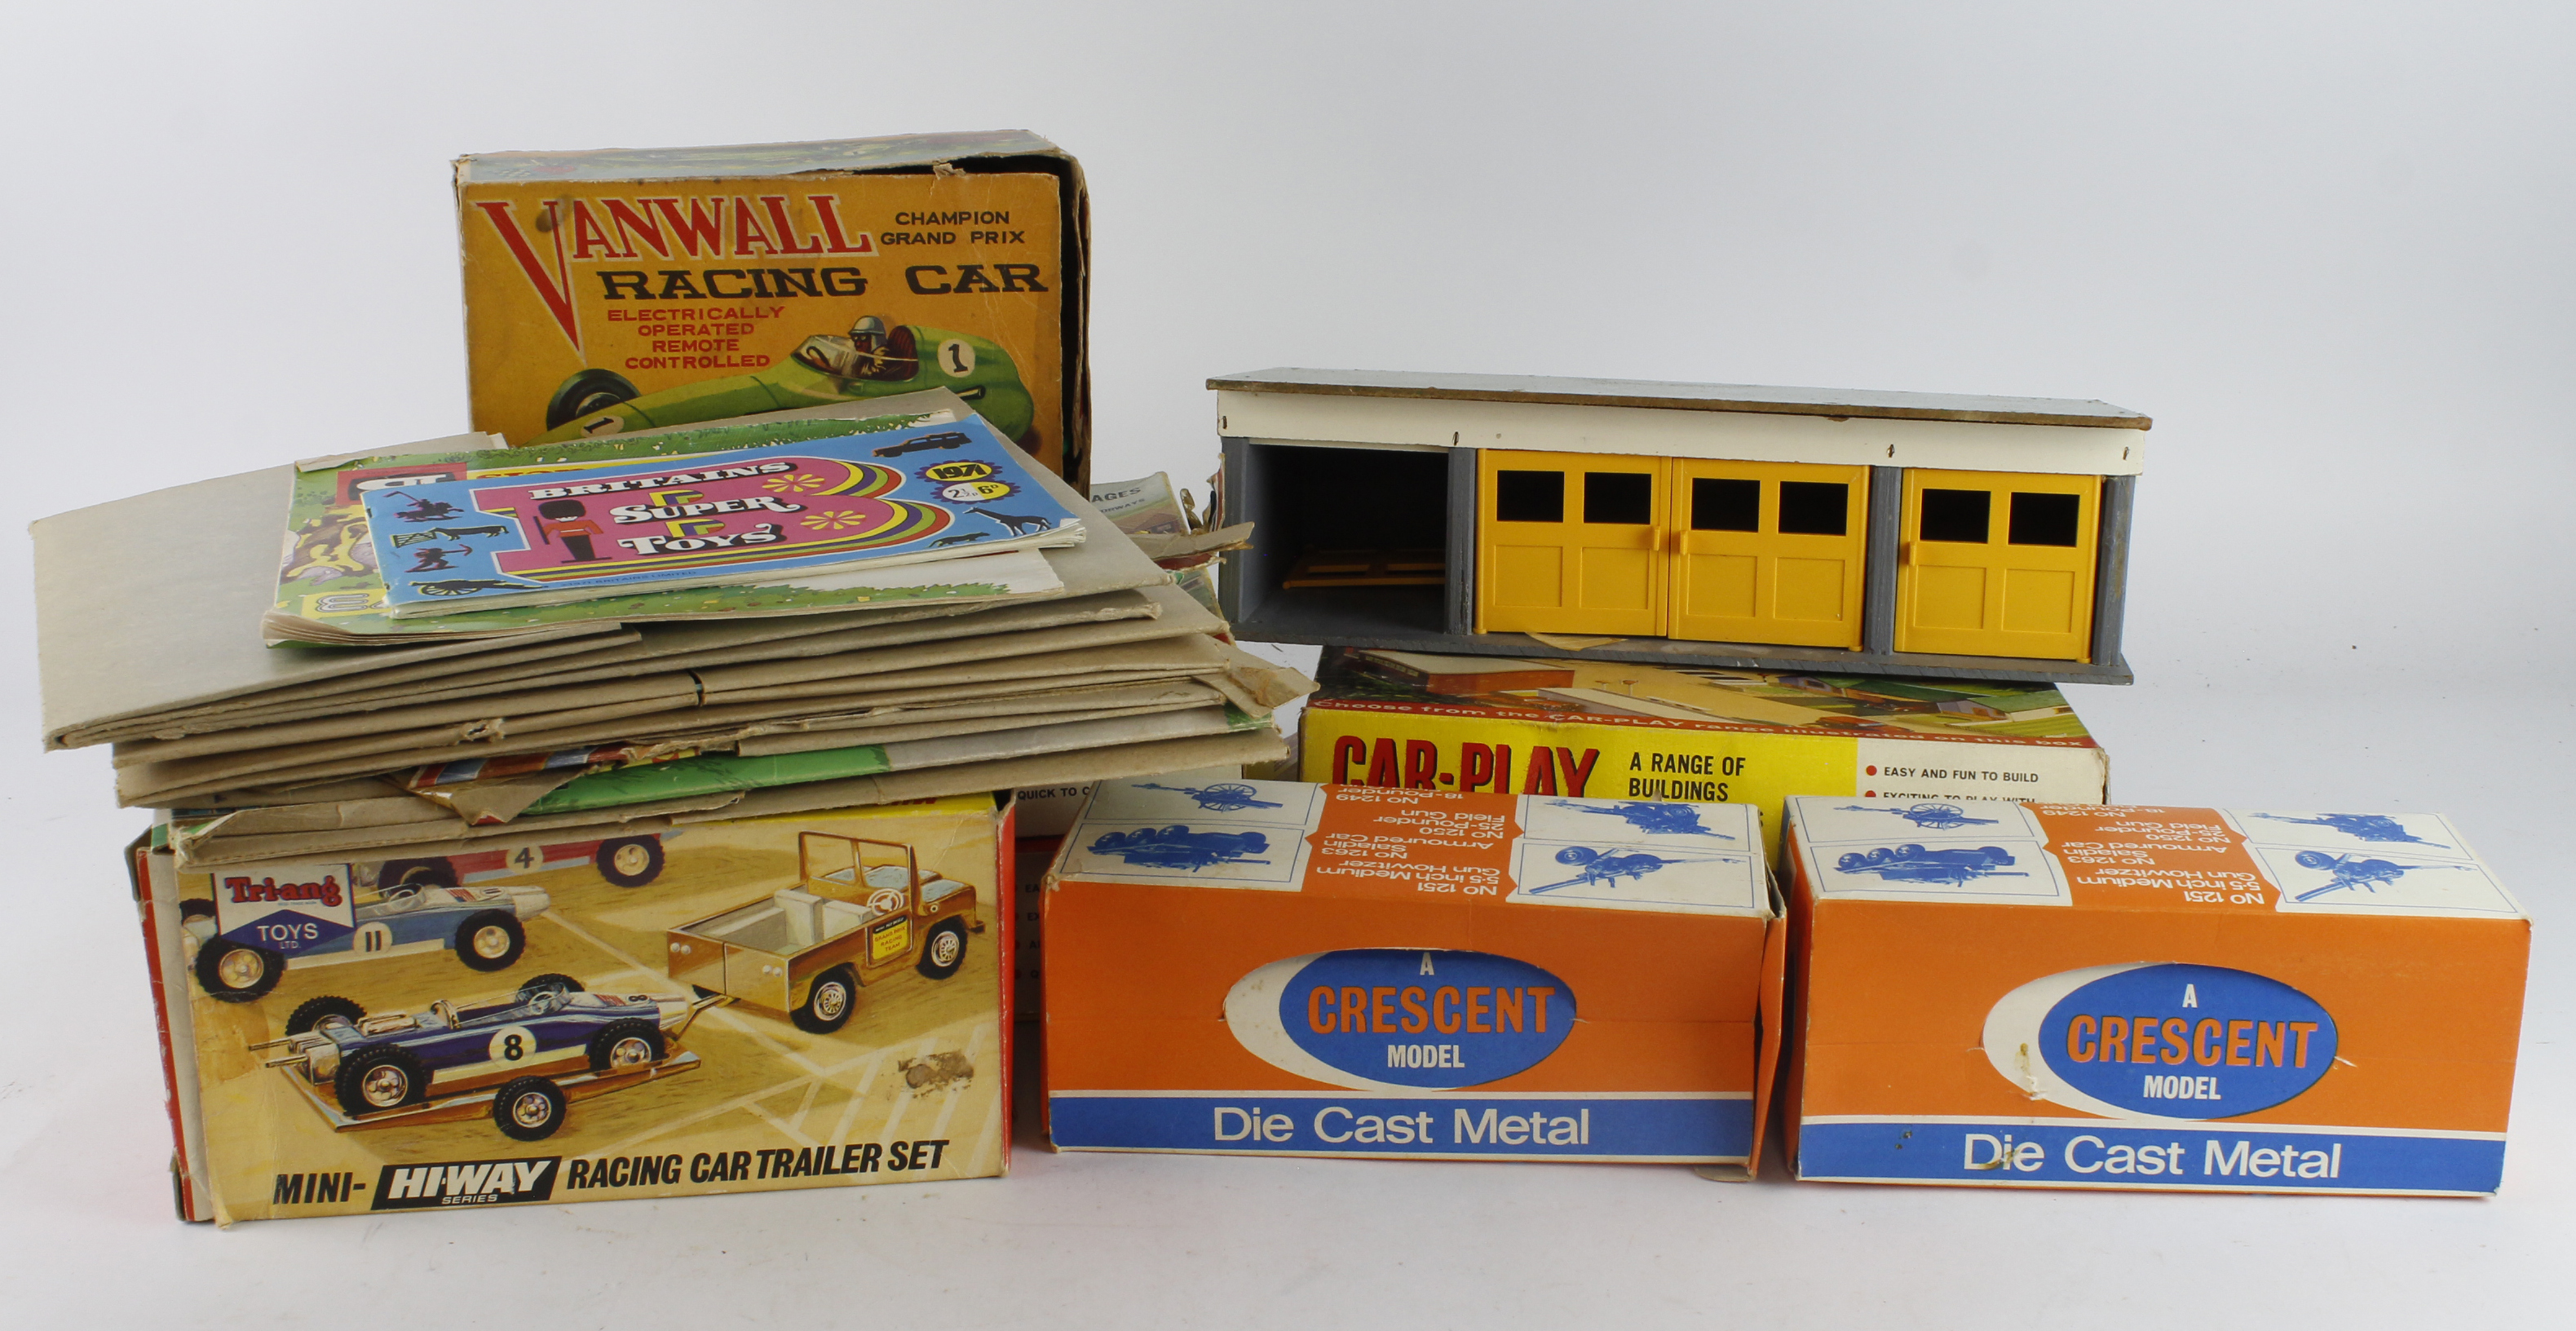 Models. A collection of various models (some boxed), including Triang Mini Hi Way Racing Car Trailer